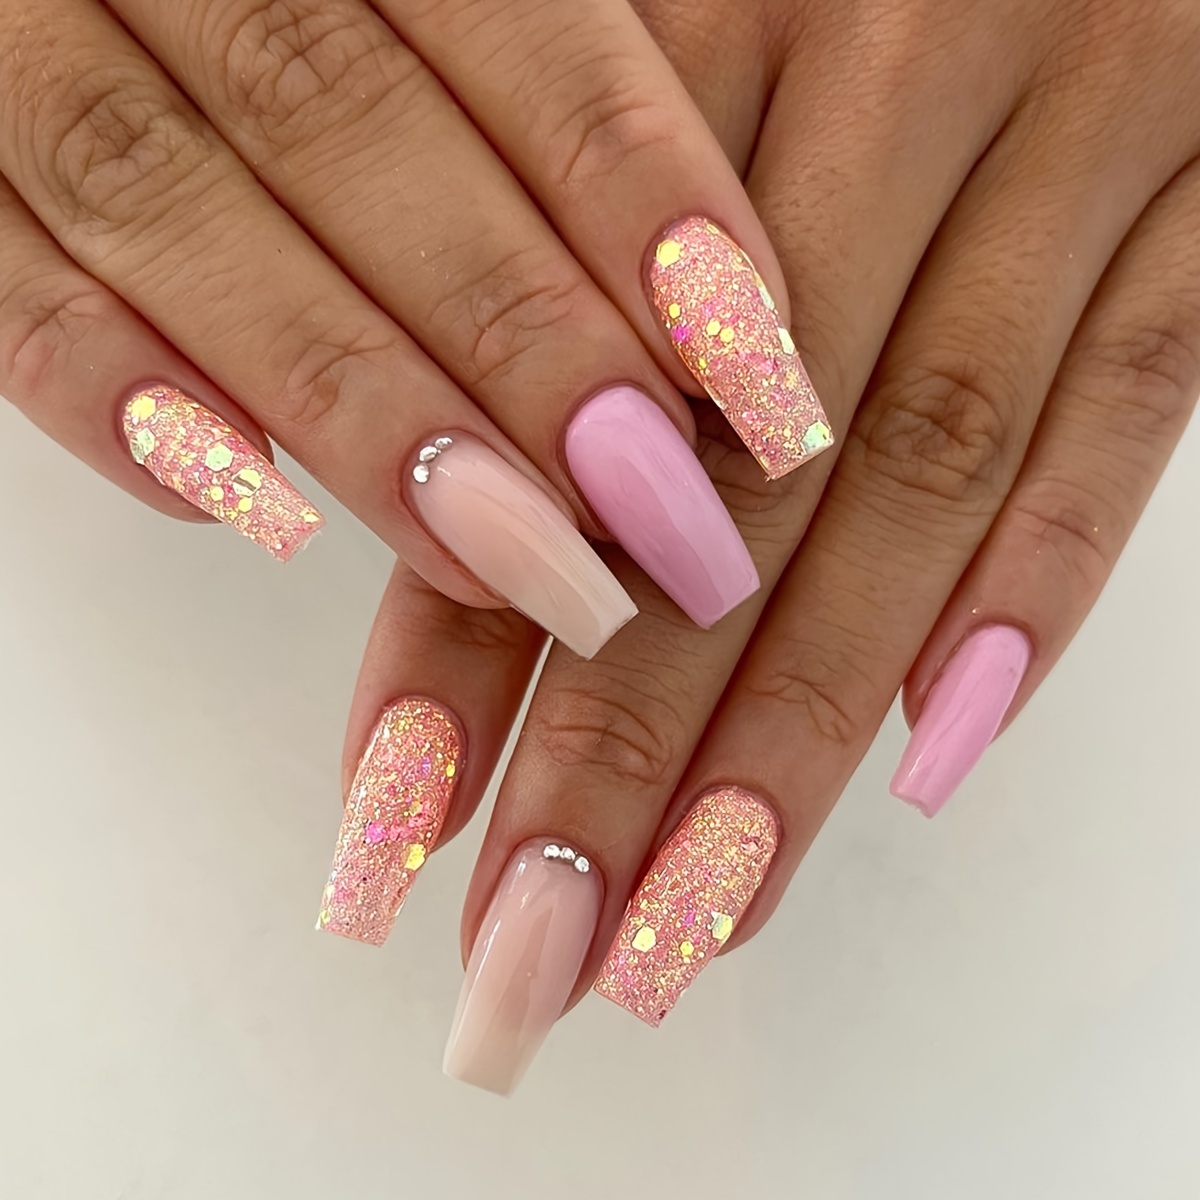 

Press On Nails Medium, Glossy And Square Fake Nails With Glitter Pattern And Rhinestone Designs Pinkish False Nails For Women And Girls, Jelly Glue And Nail File Included